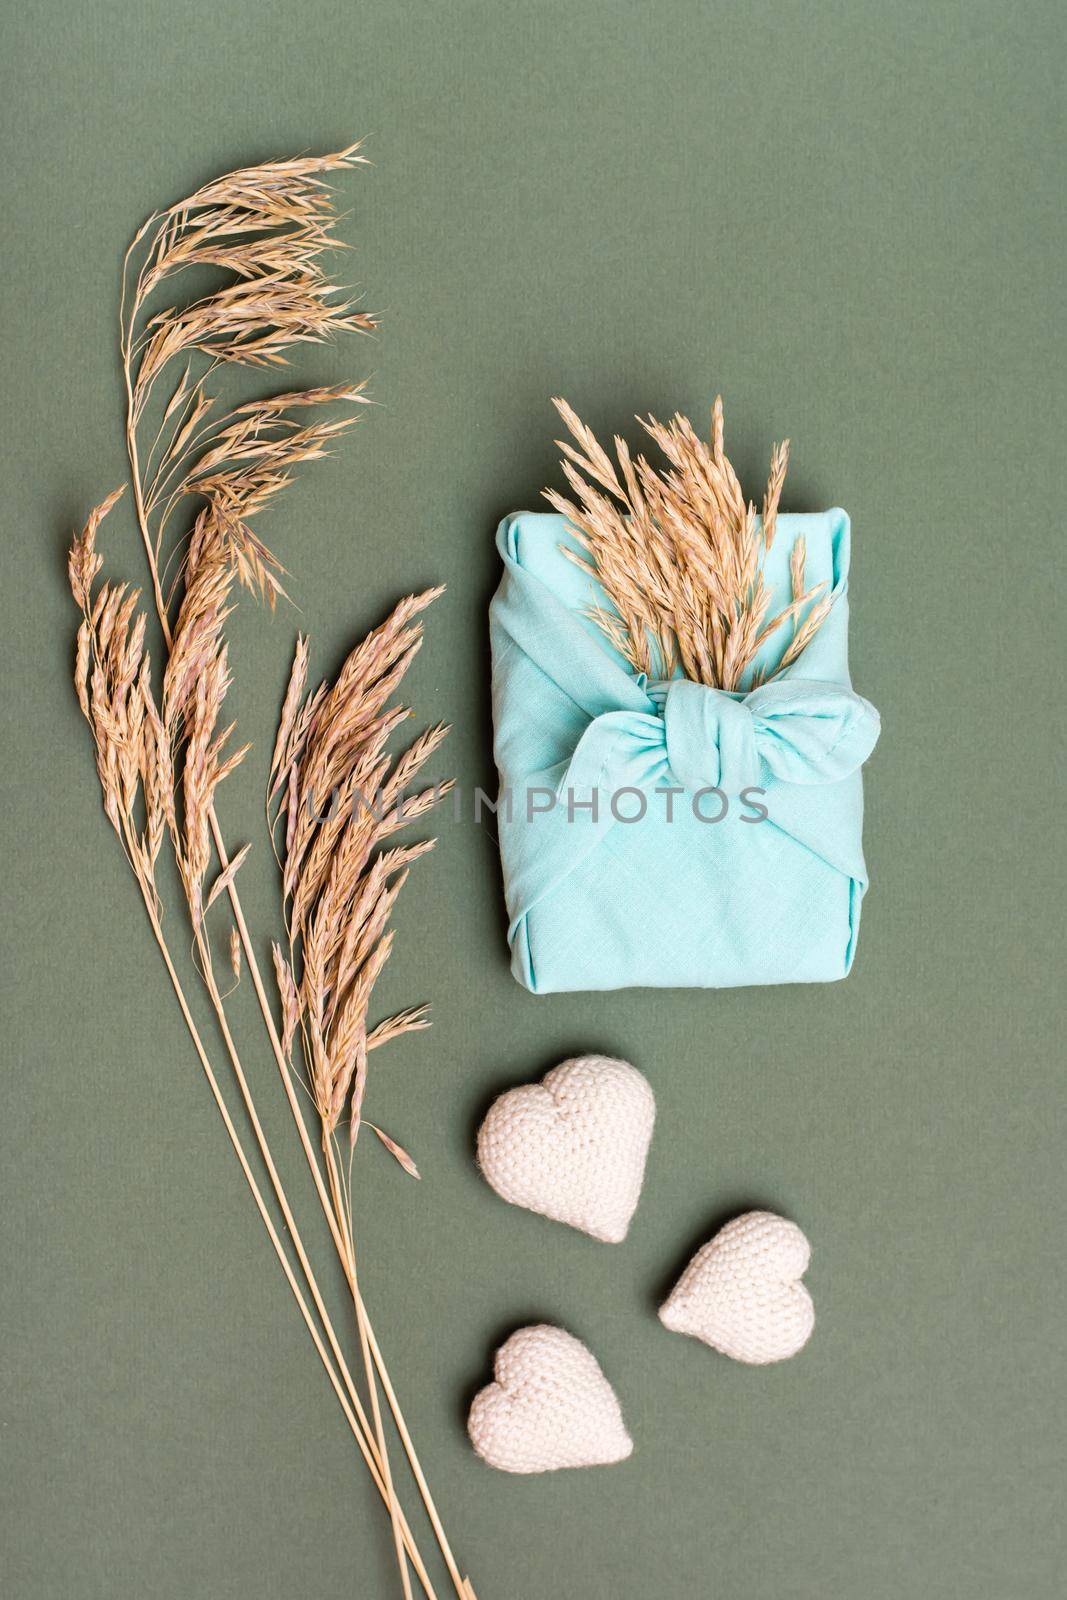 Eco friendly valentine's day gift furoshiki, knitted hearts and ears of dry grass on green background. Vertical view by Aleruana